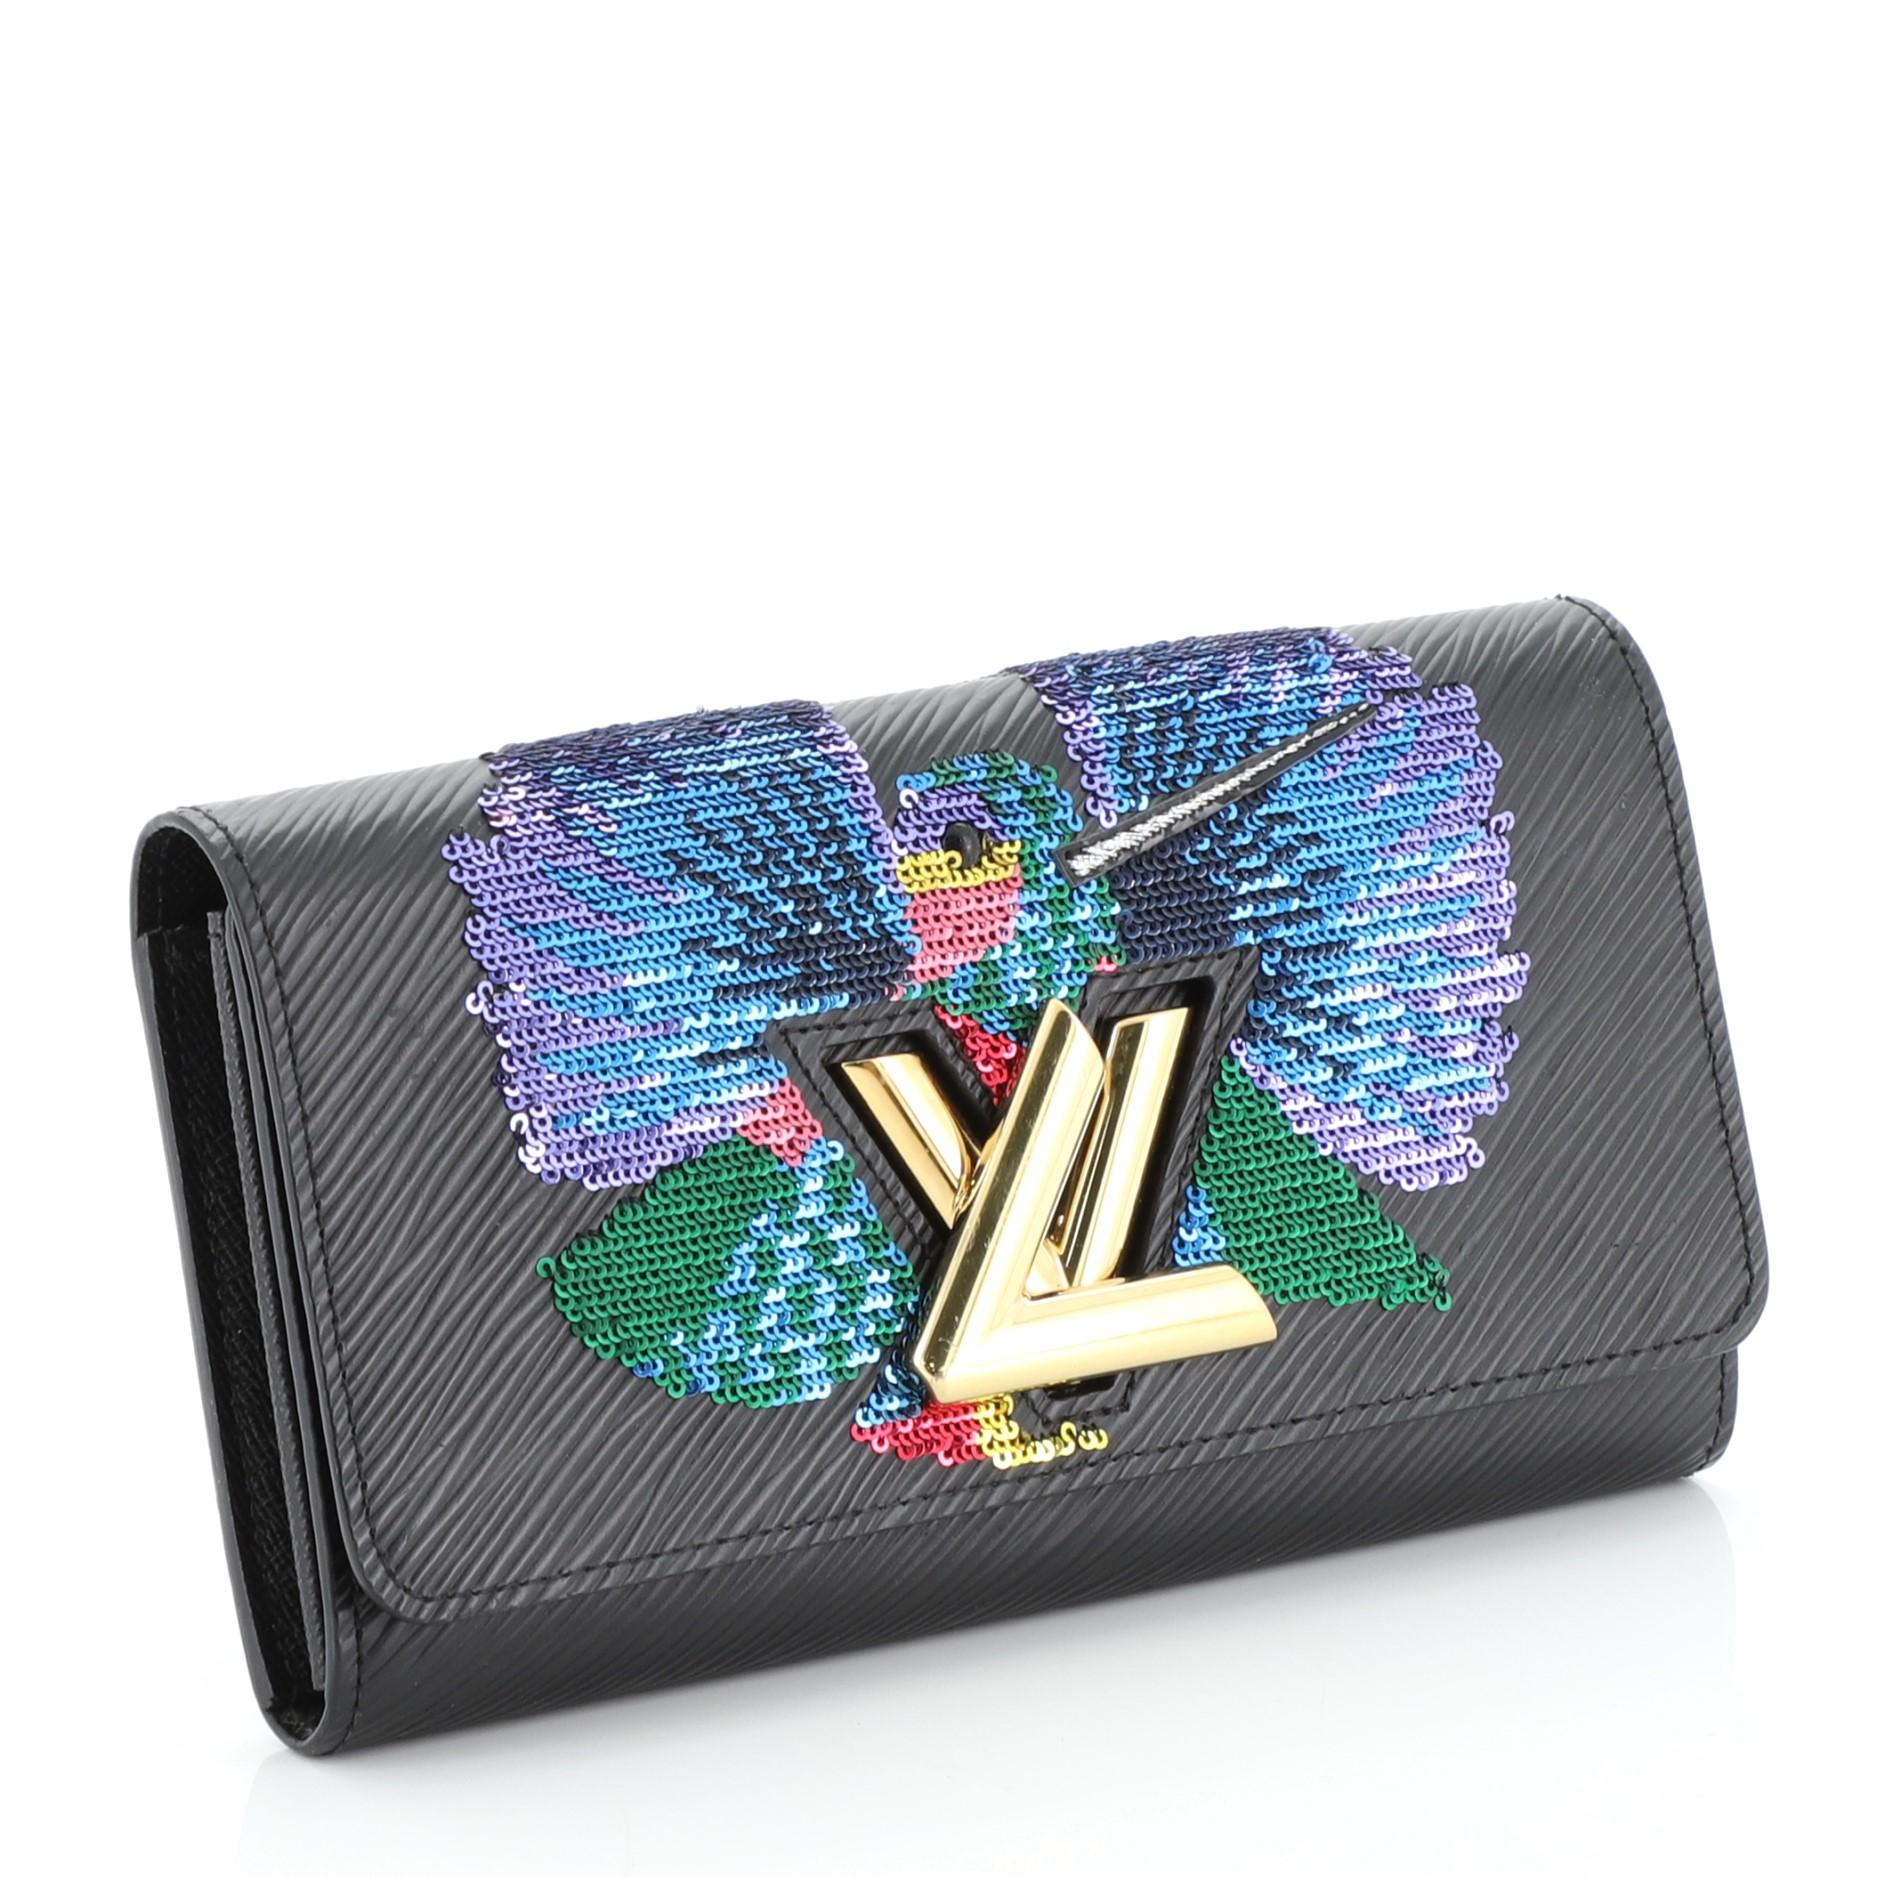 This Louis Vuitton Twist Wallet Epi Leather with Sequins, crafted in black epi leather with multicolor sequins, features gold-tone hardware. Its twist-lock closure opens to a black leather interior with multiple card slots and zip pocket.